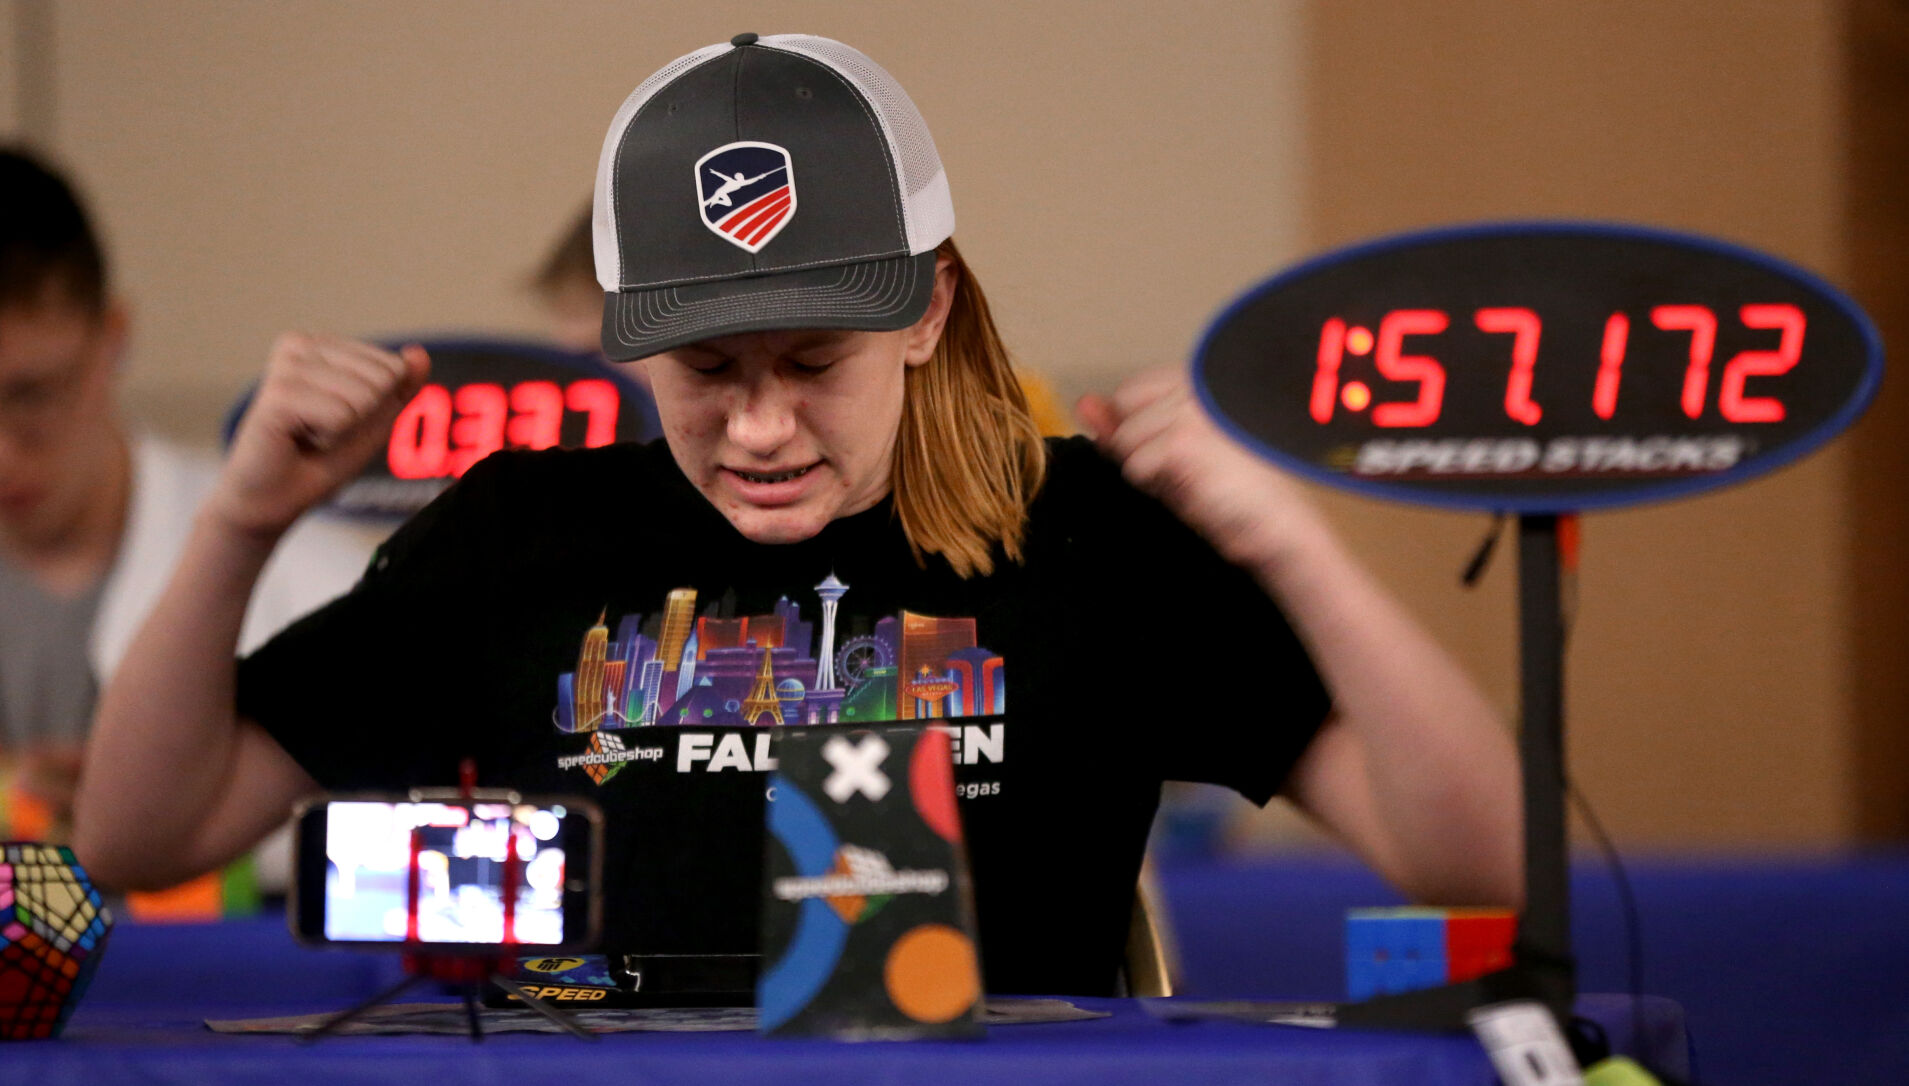 Speedcubing attracts quick-handed puzzle solvers to Tucson